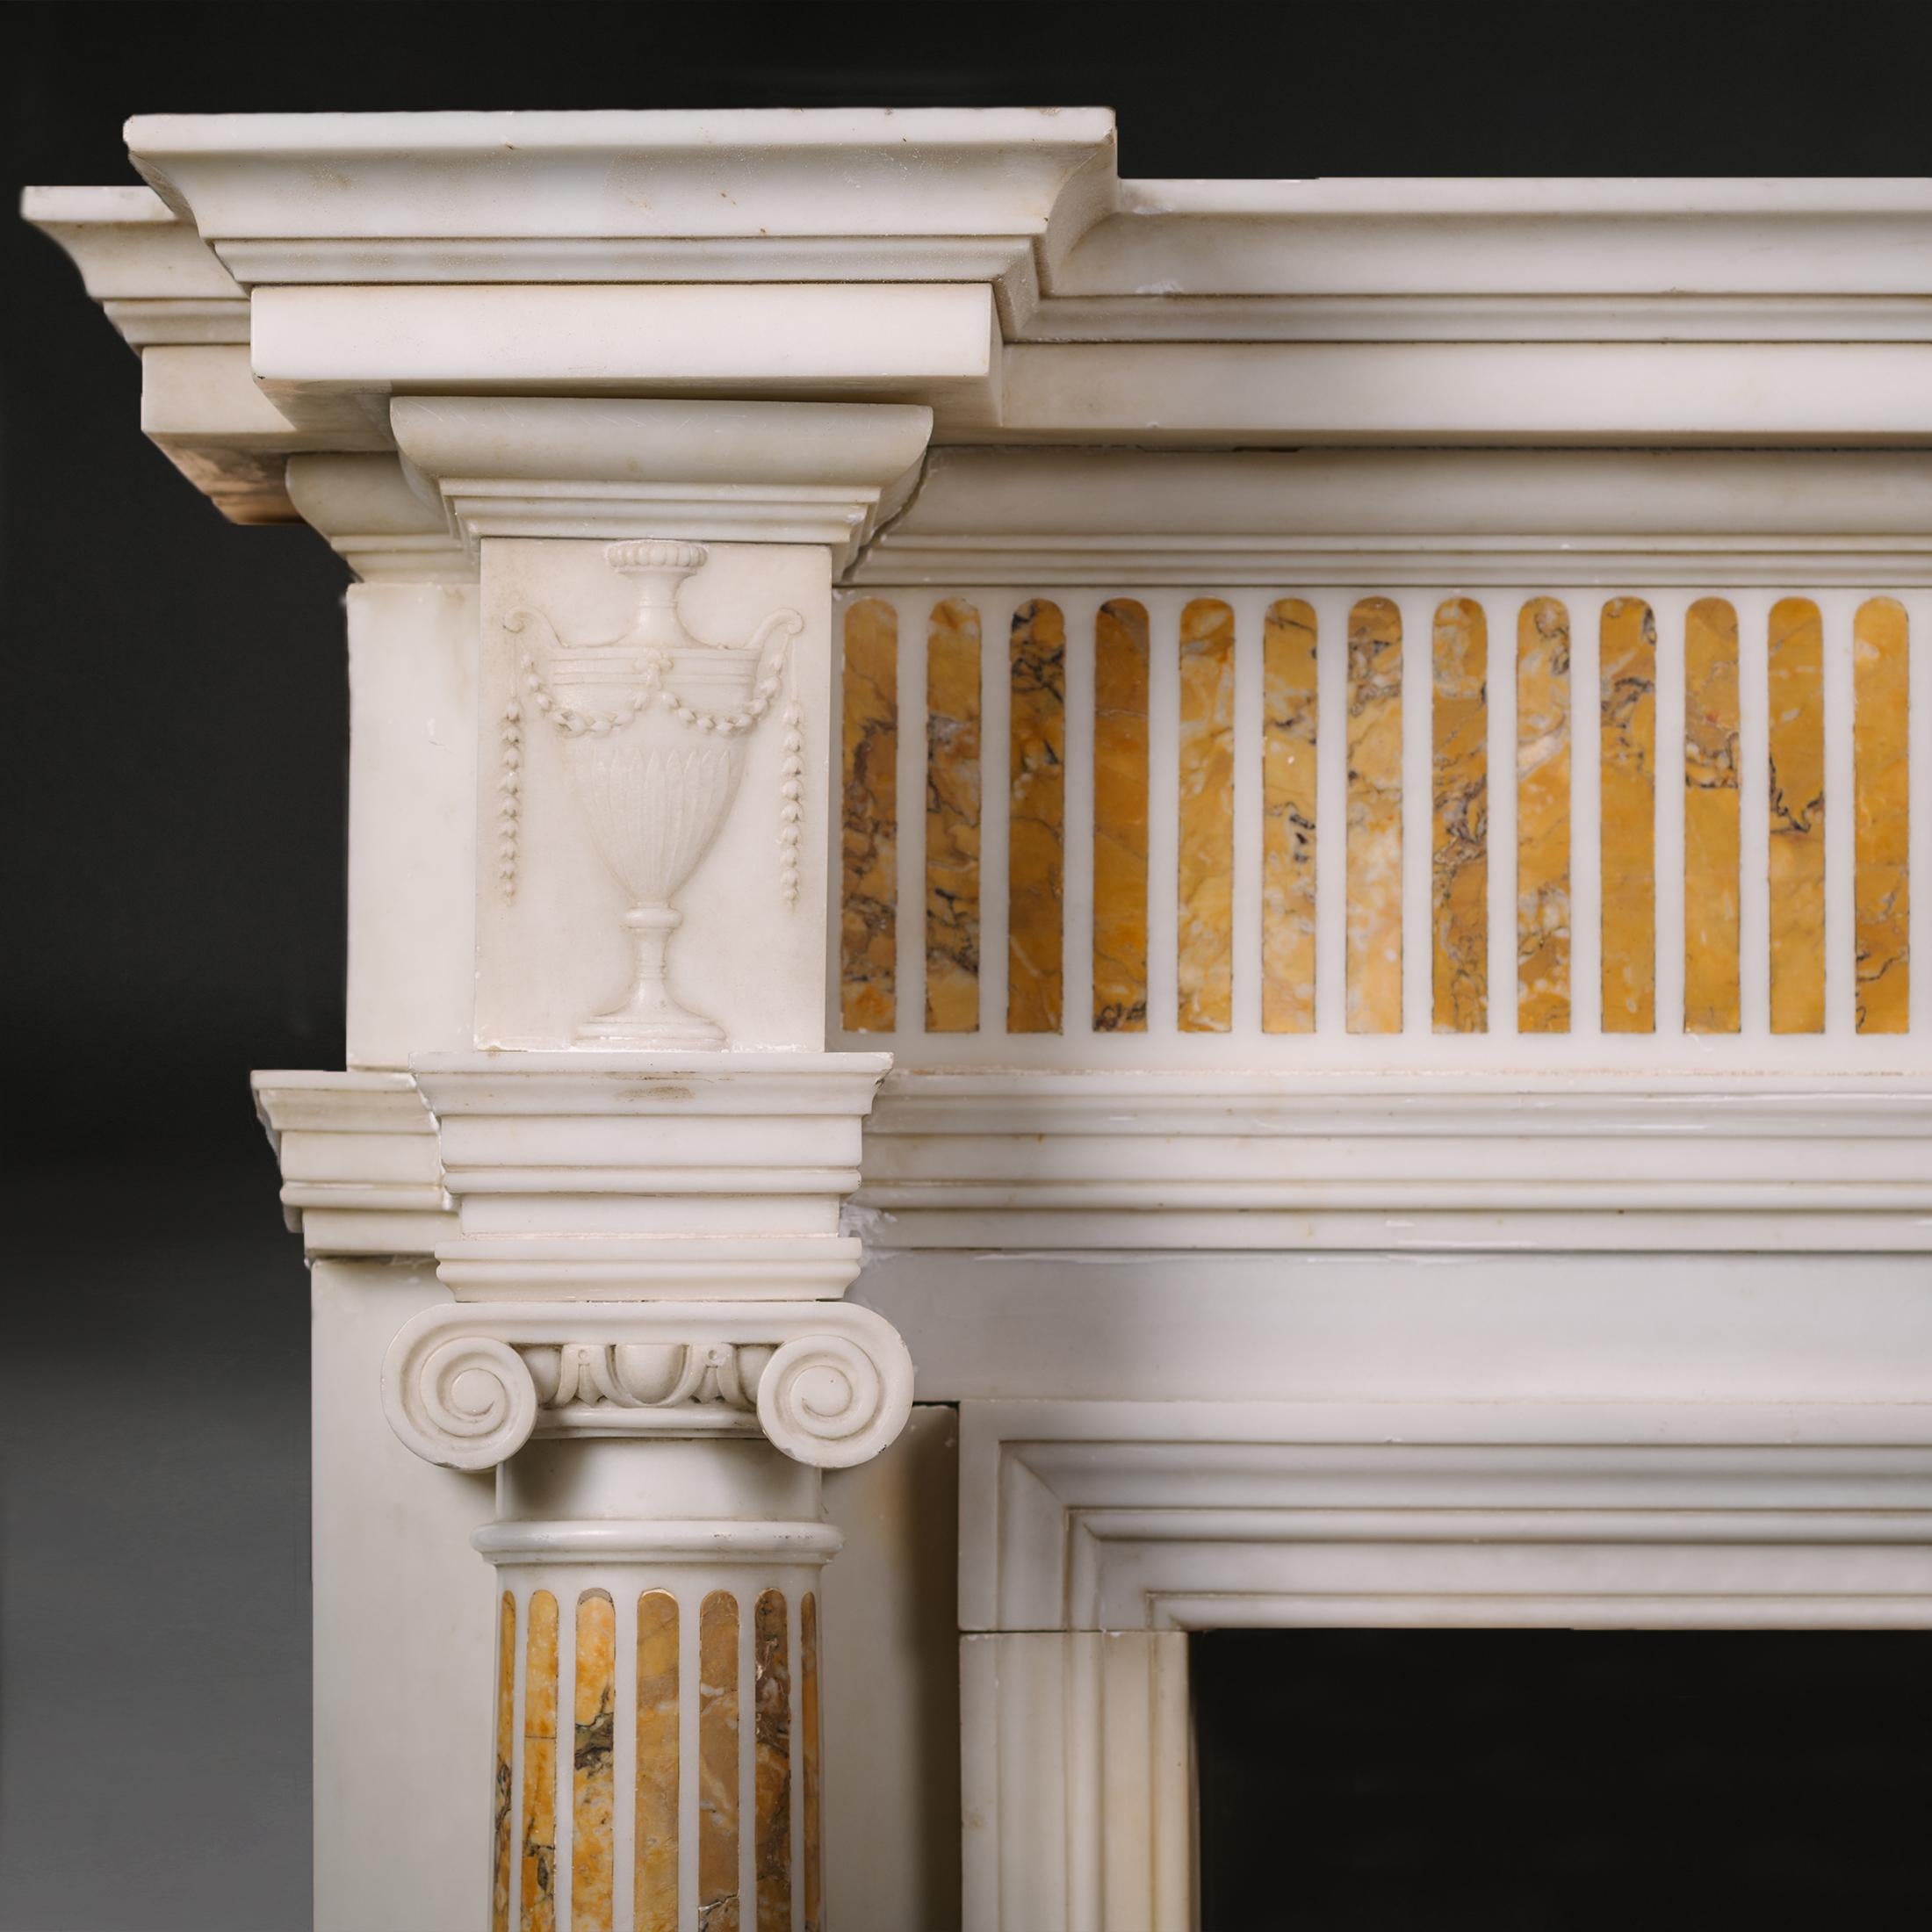 A George III Period carrara marble and sienna marble chimney piece.

This delicately carved a beautifully detailed fireplace has a breakfront shelf with inverted moulded edge. The frieze is inset with Siena marble flutes. The central projecting